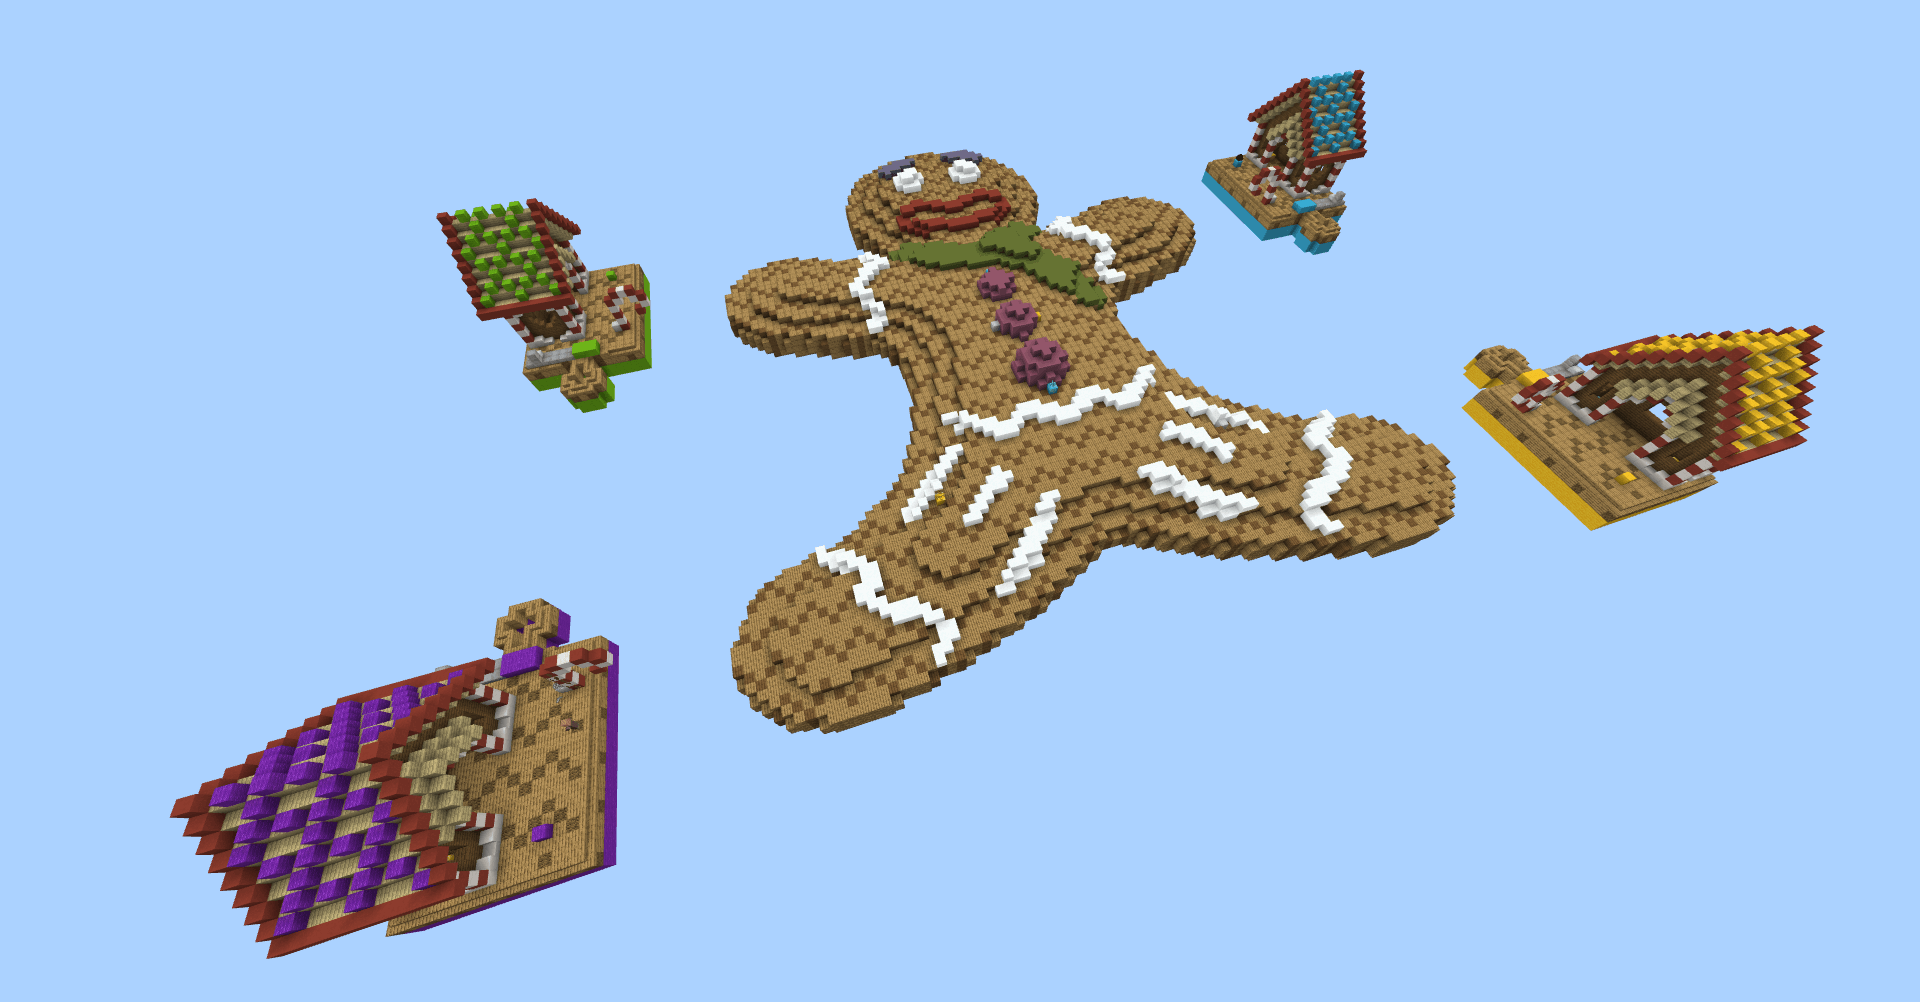 Gingerbread.png